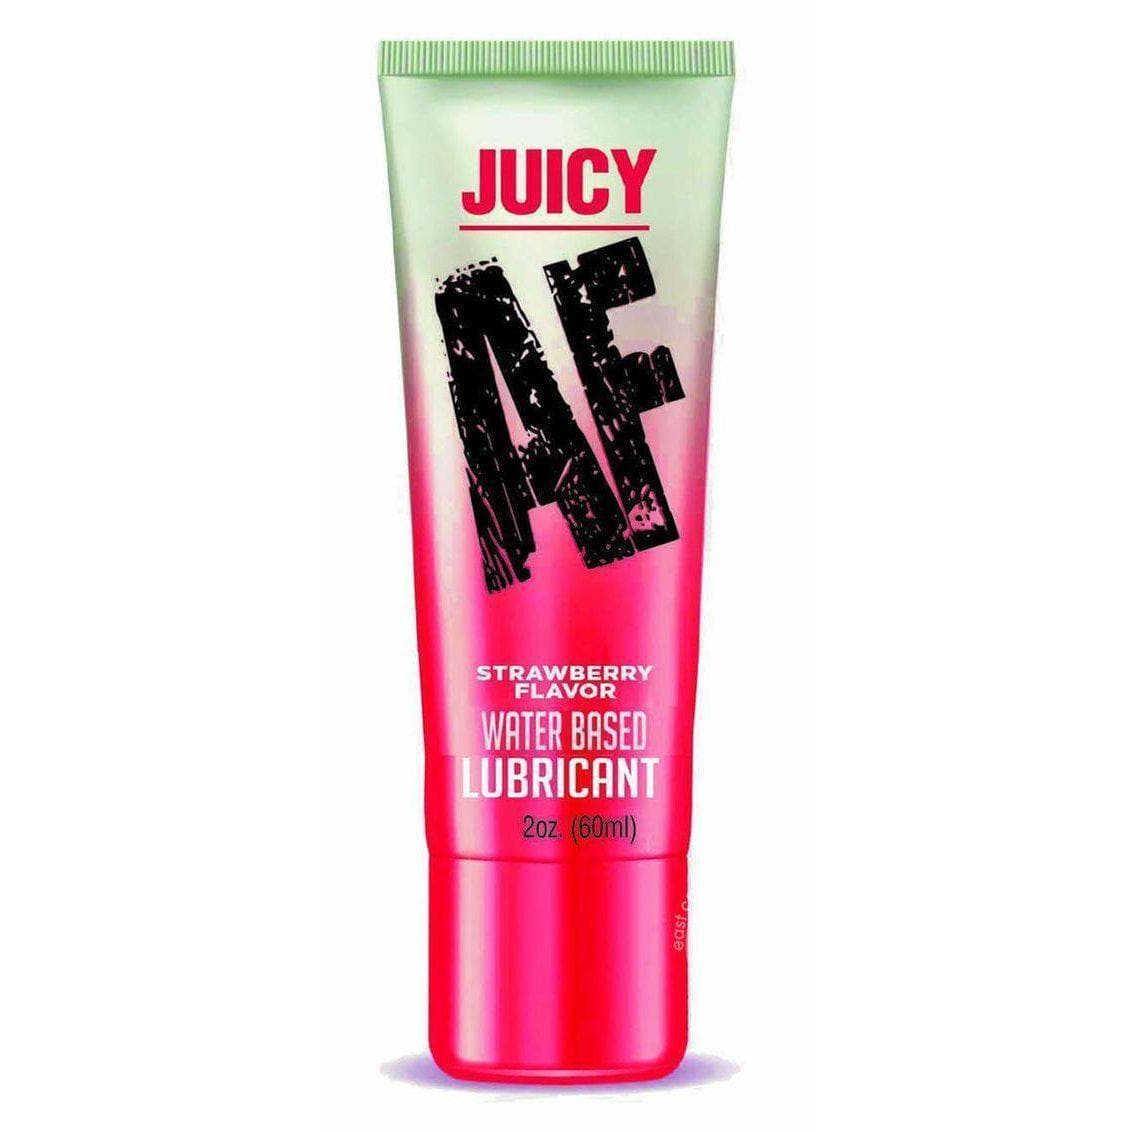 Juicy AF Water Based Flavored Lubricant Strawberry - Romantic Blessings